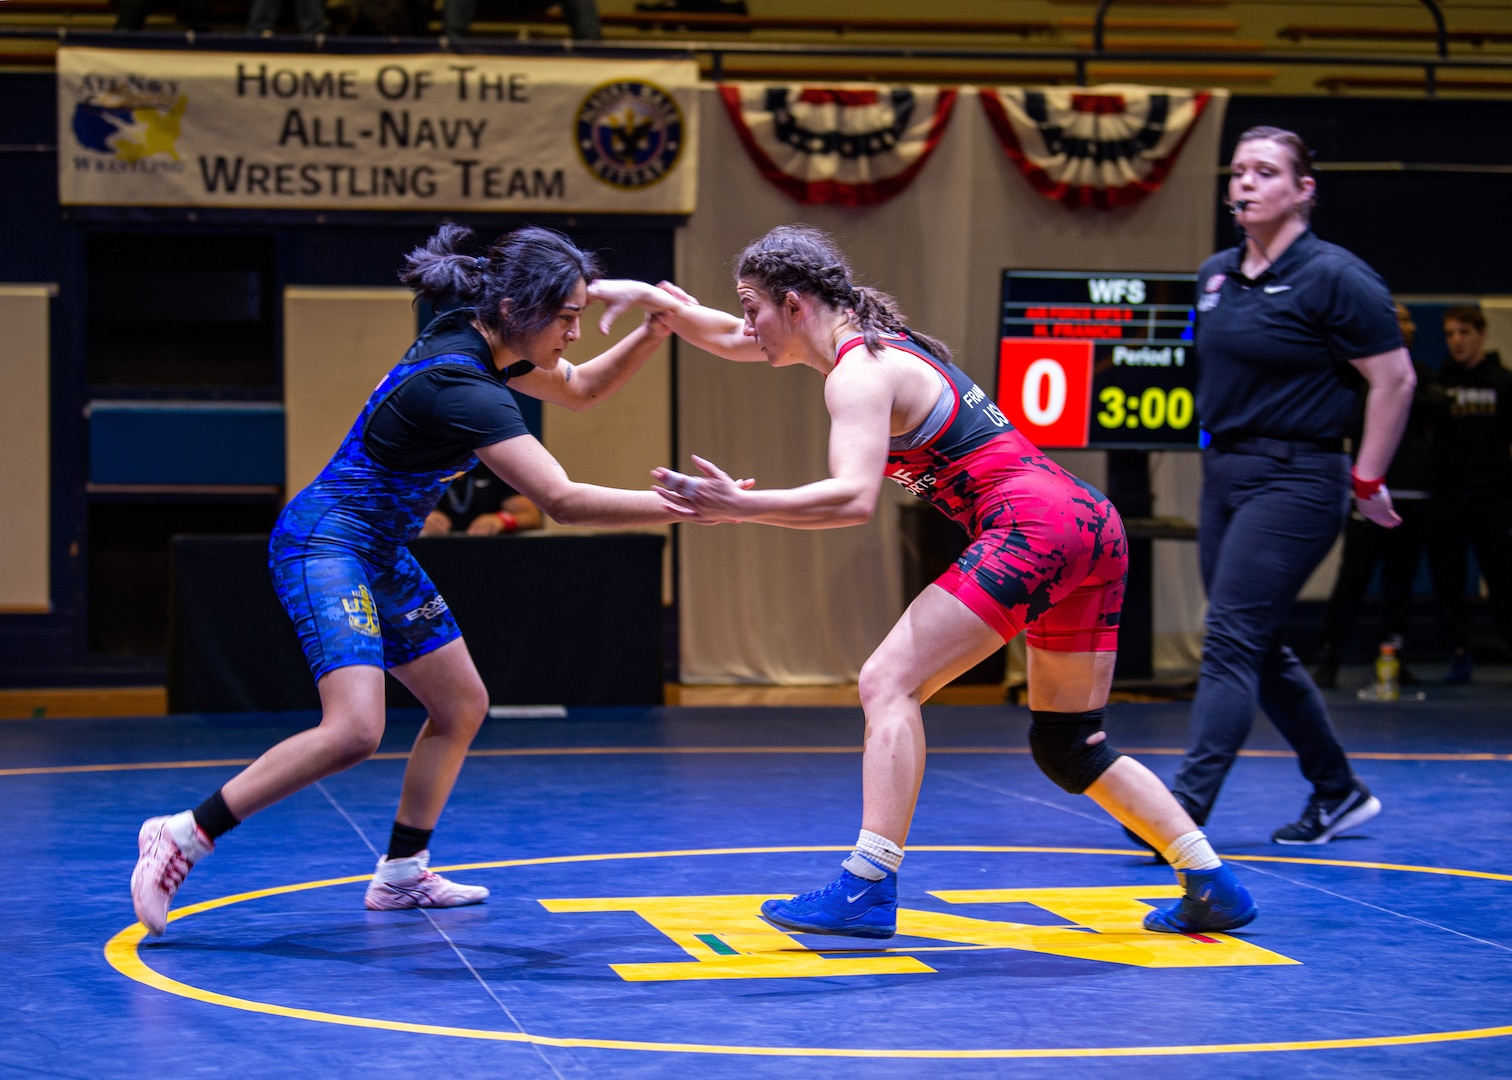 BREMERTON, WA (Feb. 24, 2023) - Senior Airman Haley Franich (U.S. Air Force) squares off with PO3 Joanalicia Ramirez (U.S. Navy) at 55 kg of the 2023 Armed Forces Wrestling Championship held at Naval Base Kitsap, Bremerton, Washington from February 25-26. This year’s championship features teams from the Army, Navy (including the Marine Corps and Coast Guard Wrestlers), and Air Force (including Space Force Wrestlers). Teams compete in Men’s Greco-Roman, Men’s Freestyle, and Women’s Freestyle wrestling styles. (Photo by Petty Officer 1st Class Ian Carver).